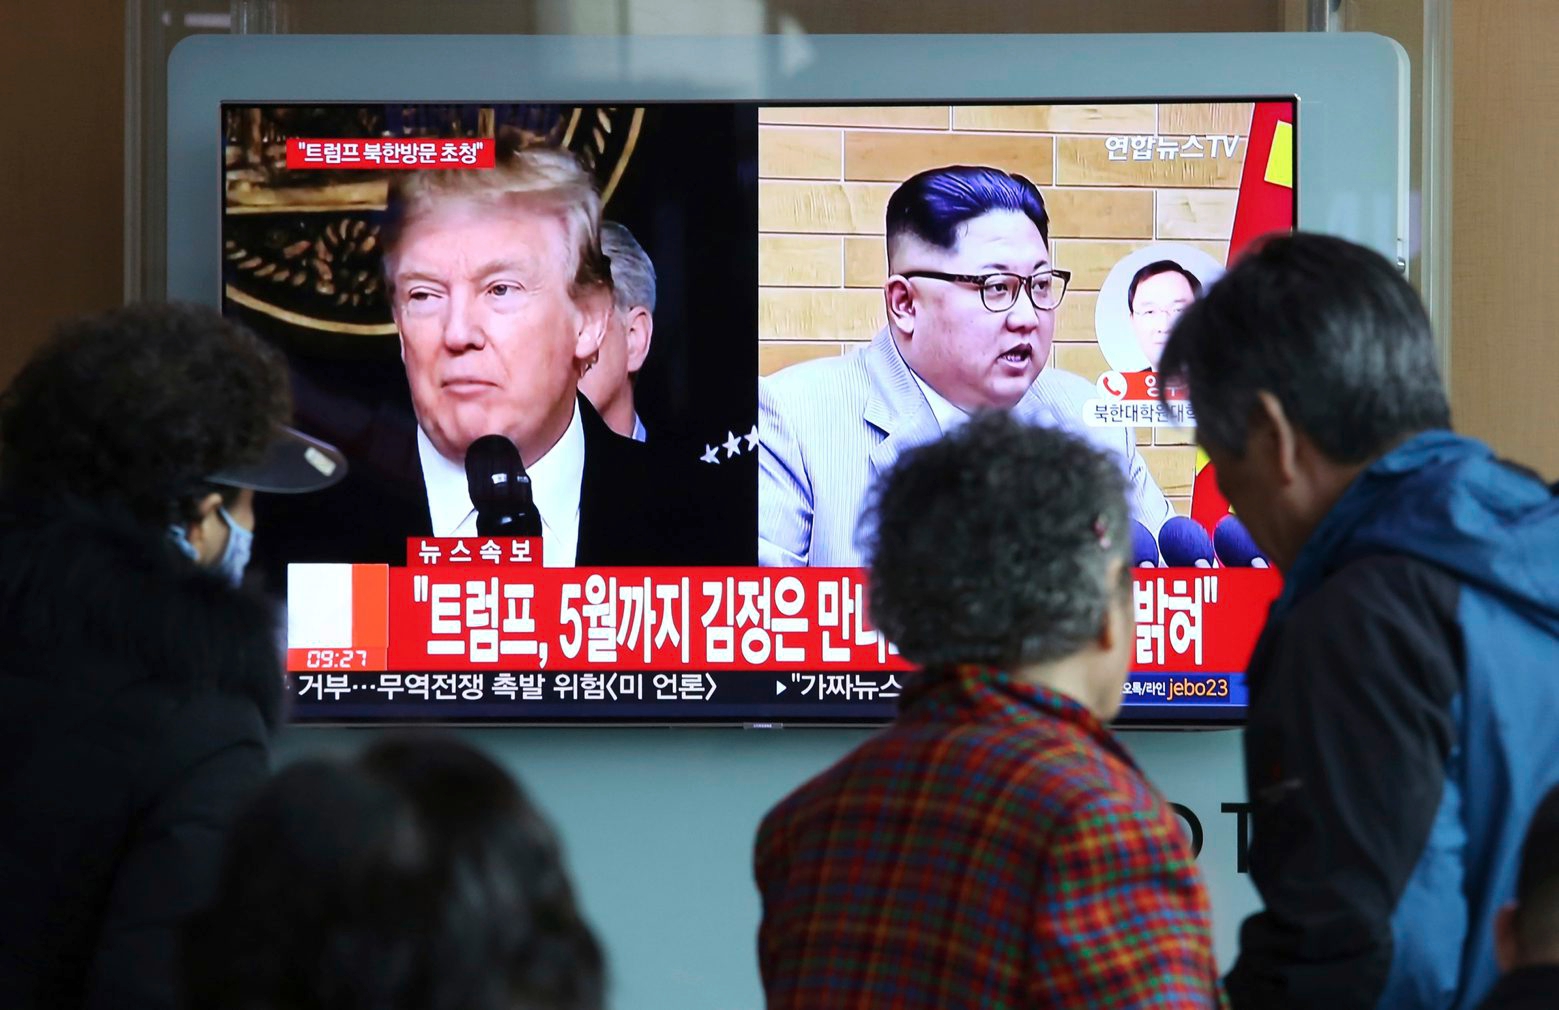 People watch a TV screen showing North Korean leader Kim Jong Un and U.S. President Donald Trump, left, at the Seoul Railway Station in Seoul, South Korea, Friday, March 9, 2018. Trump has accepted an offer of a summit from the North Korean leader and will meet with Kim Jong Un by May, a top South Korean official said Thursday, in a remarkable turnaround in relations between two historic adversaries. The signs read: " Trump has accepted an offer of a summit from the North Korean leader and will meet with Kim by May." (AP Photo/Ahn Young-joon) South Korea US North Korea